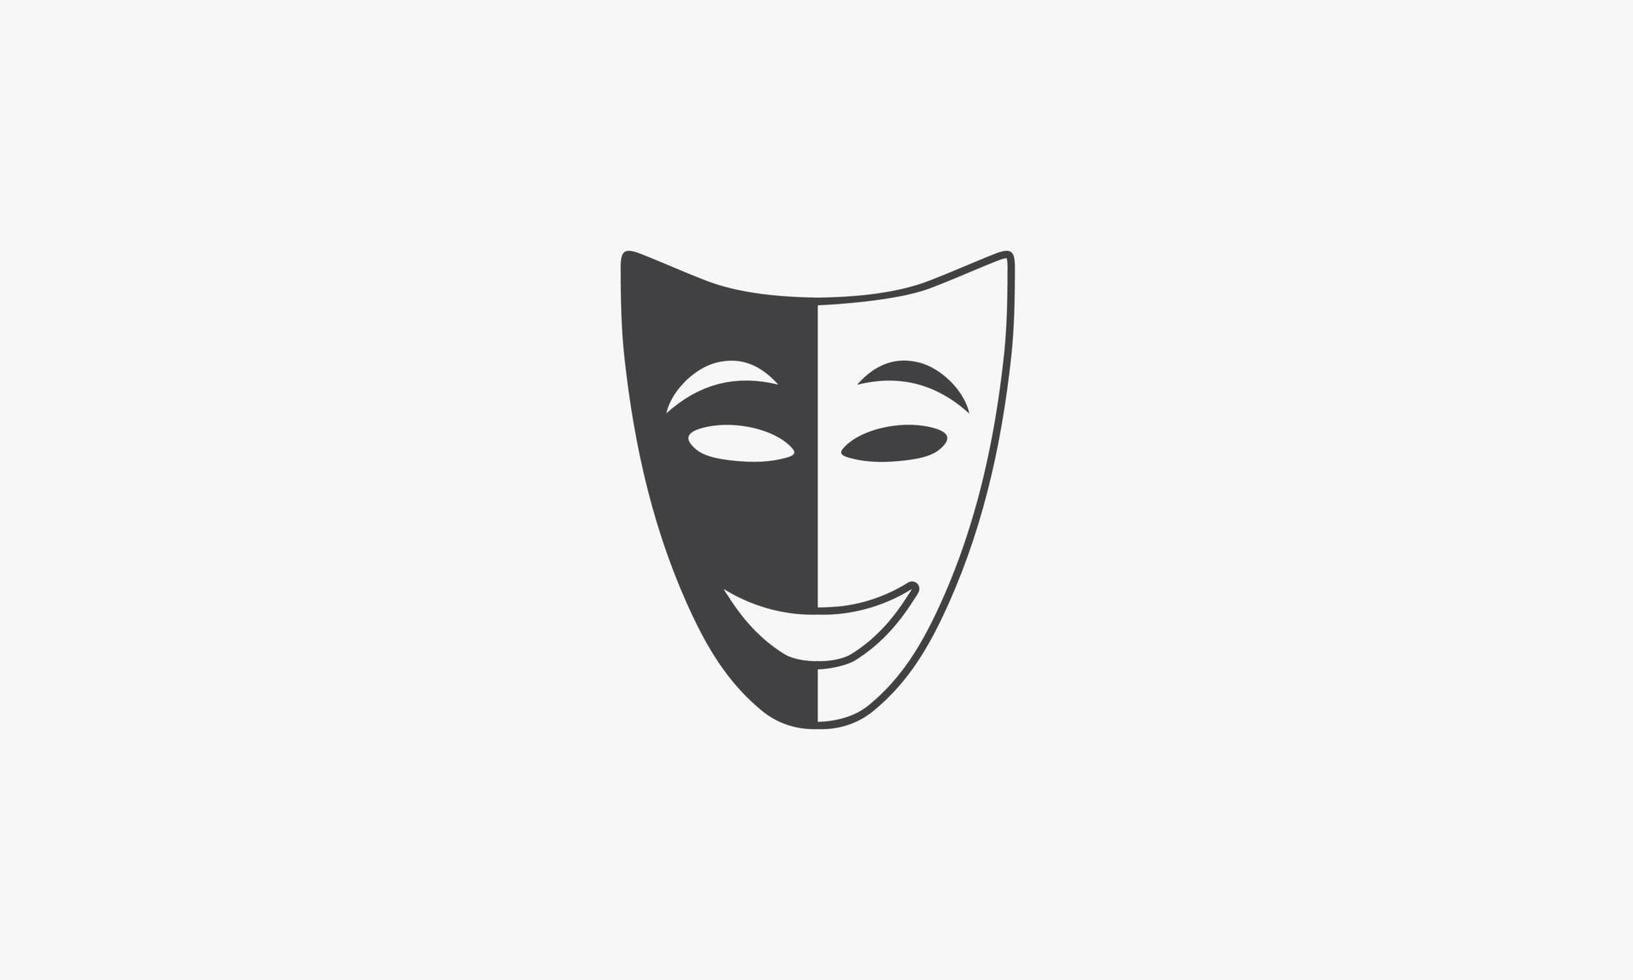 theatrical mask black white stop racism. racial equality vector illustration.